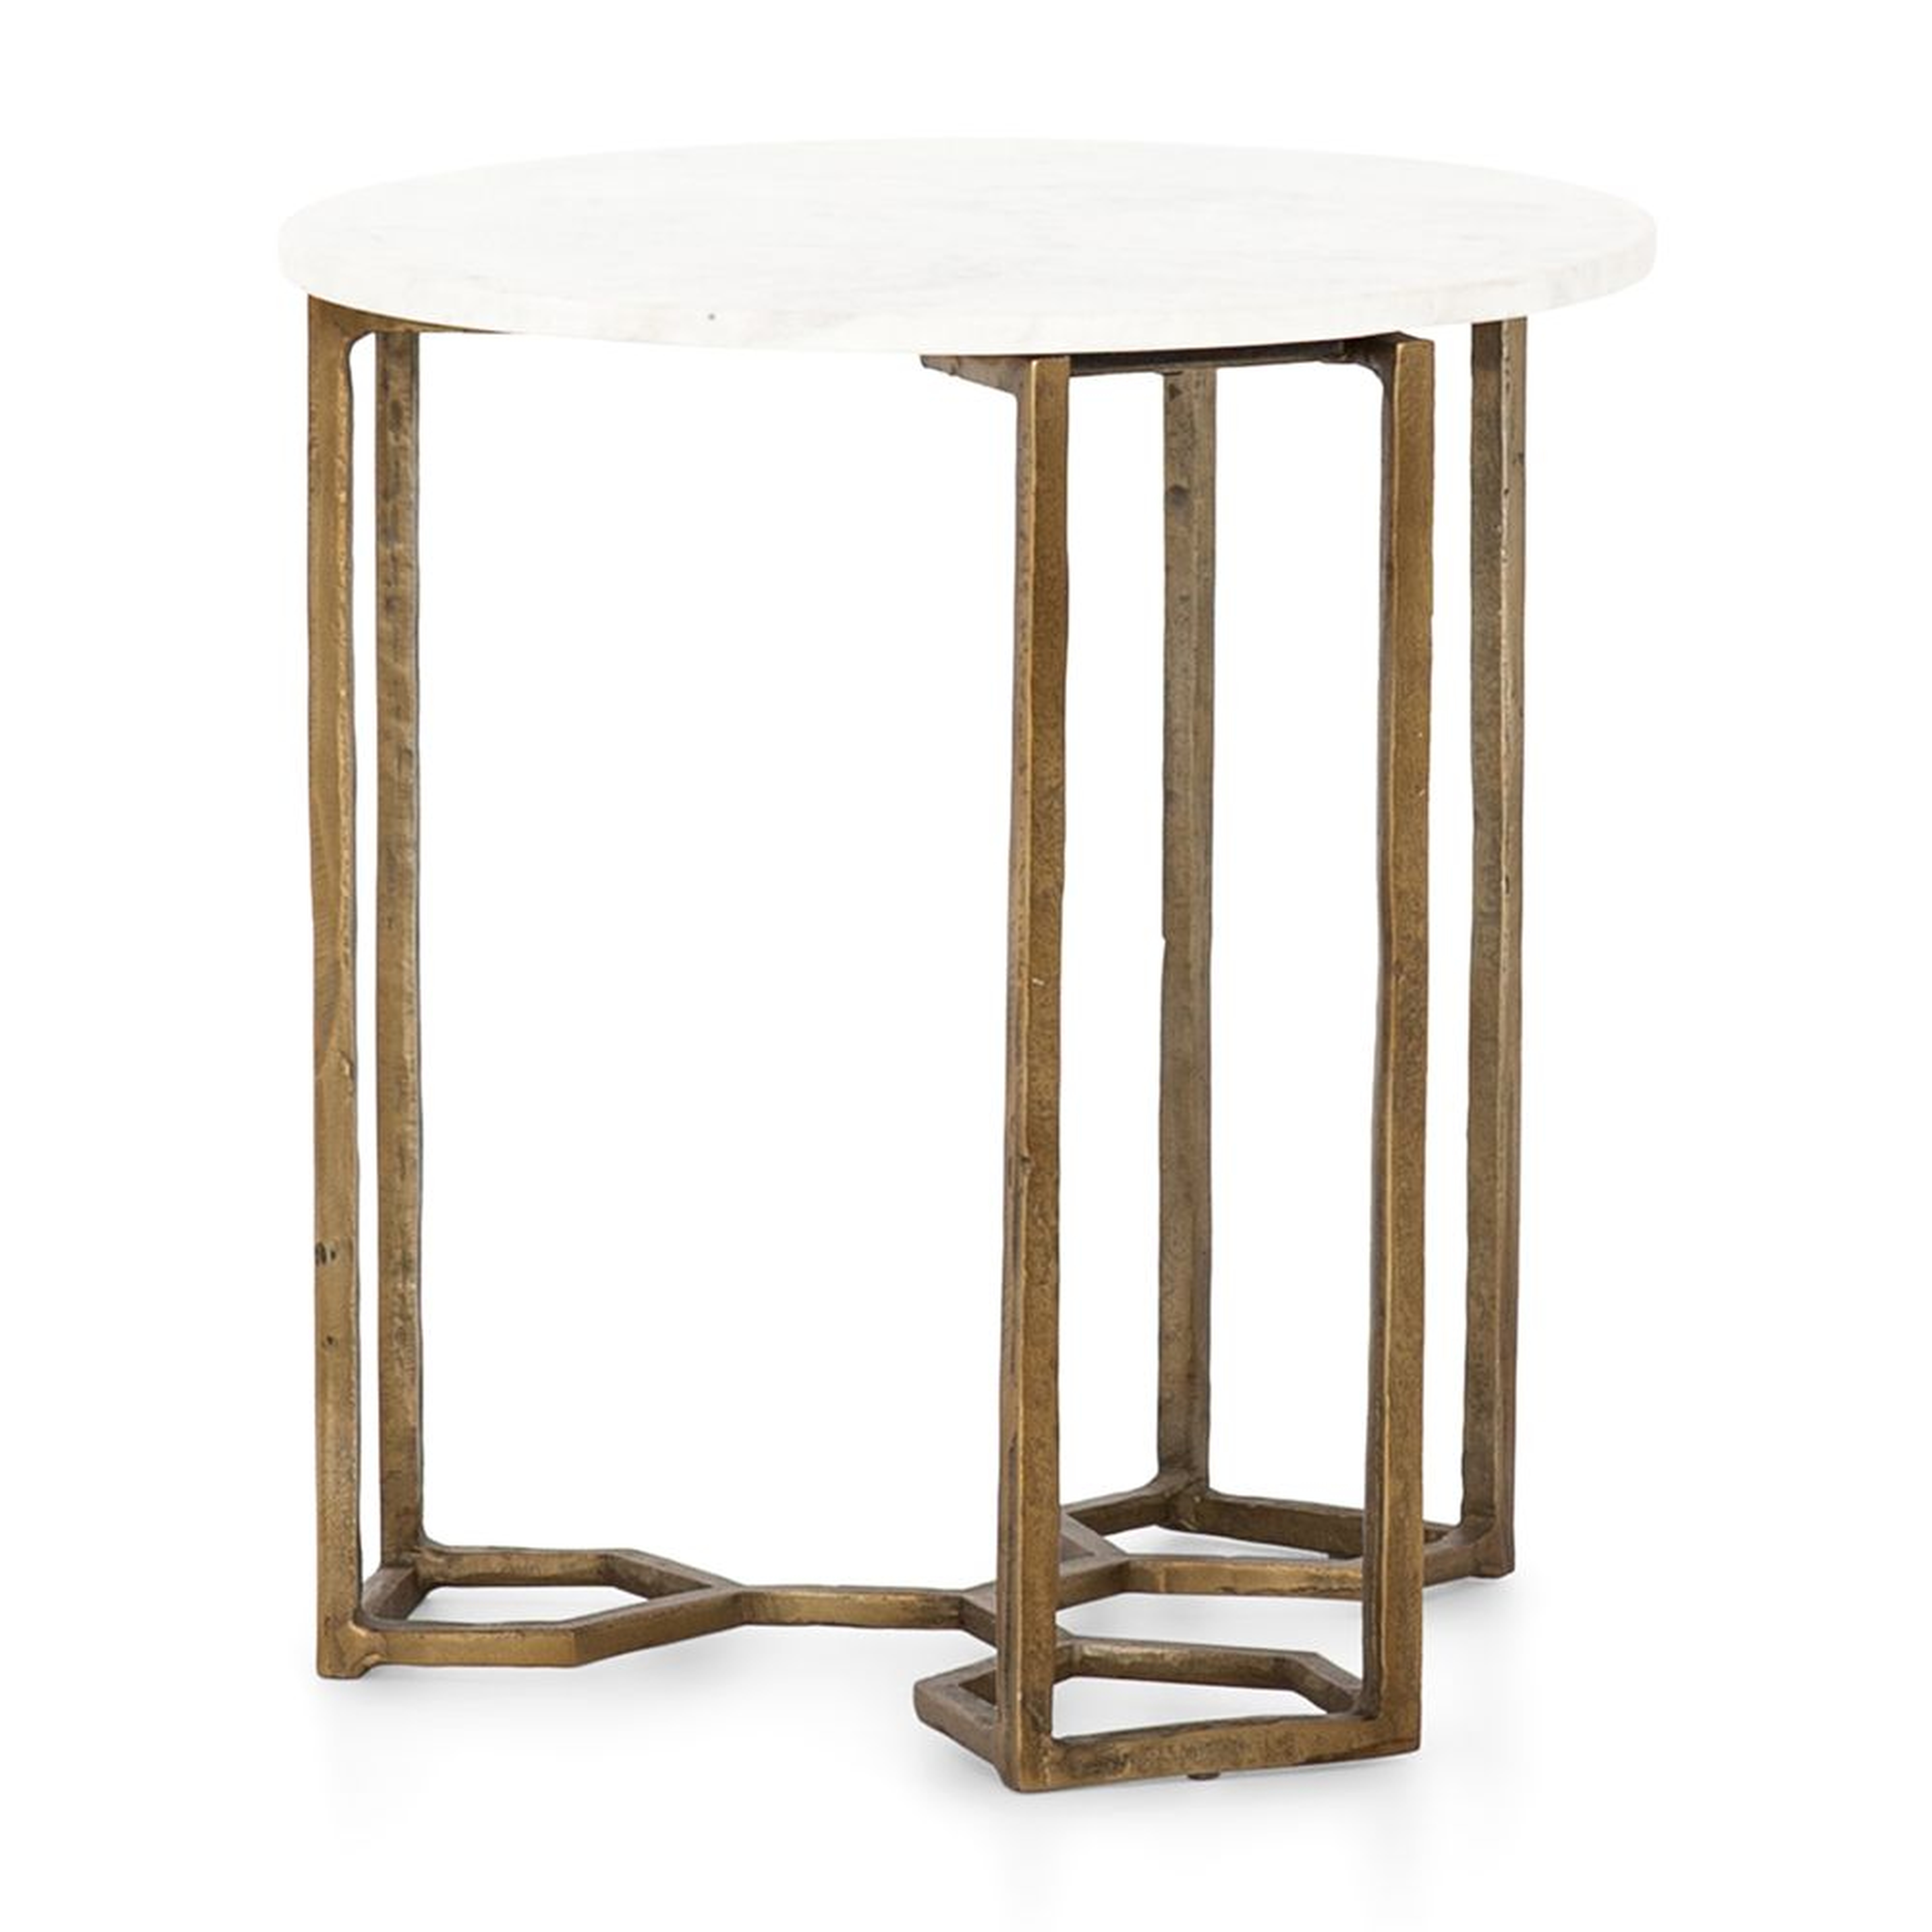 Hattie End Table - Crate and Barrel